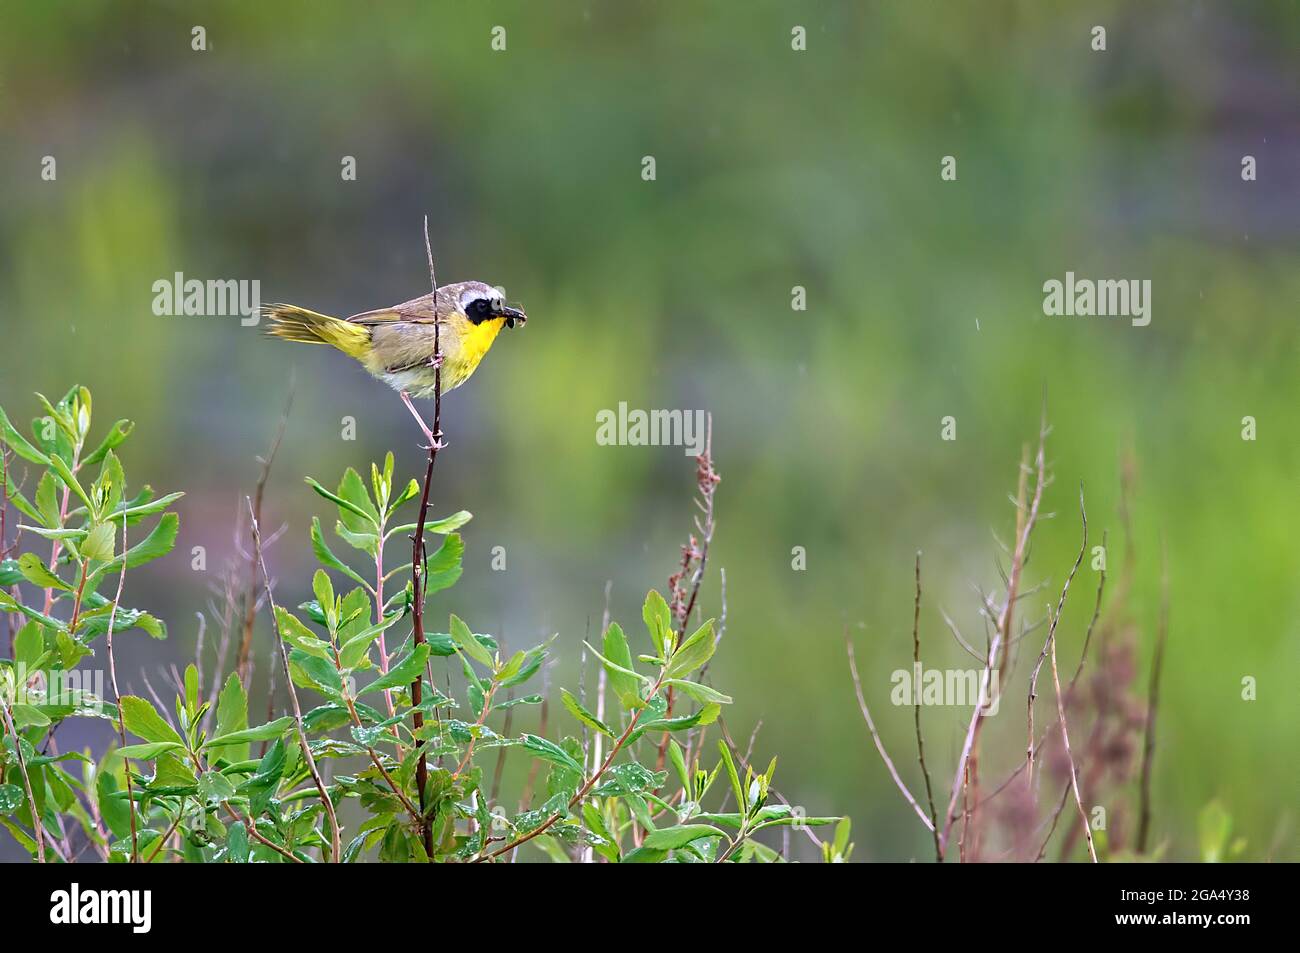 Common Yellowthroat (Geothlypis trichas) perched on a plant stem with a bug in its beak. Room for copyspace. Stock Photo